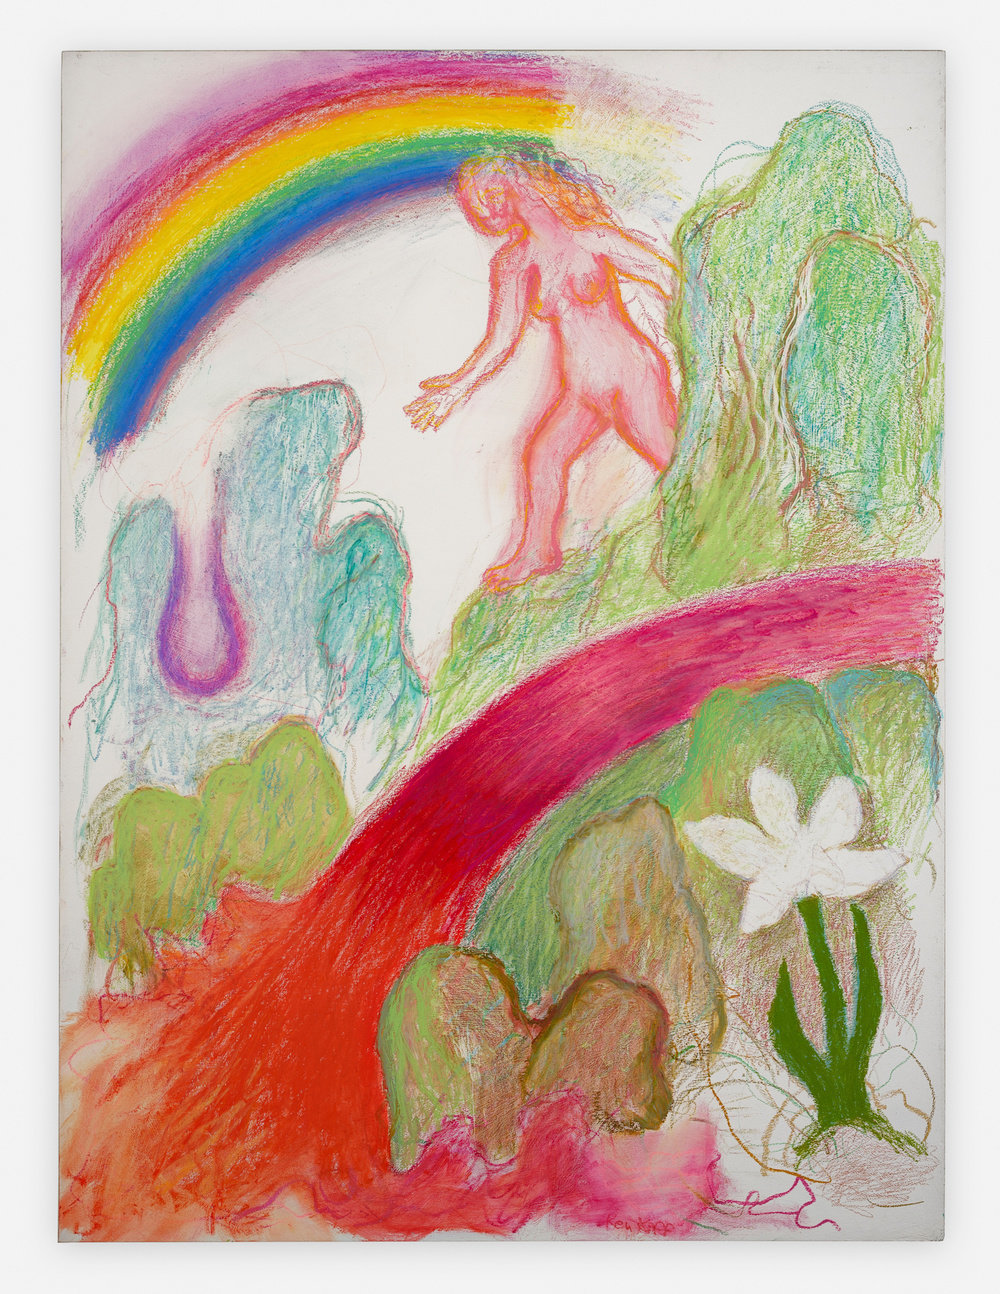 Kiff, rainbow, 1999, oil, pastel and acrylic on paper, 57 1 8 x 33 1 8 in., 145 x 84 cm.